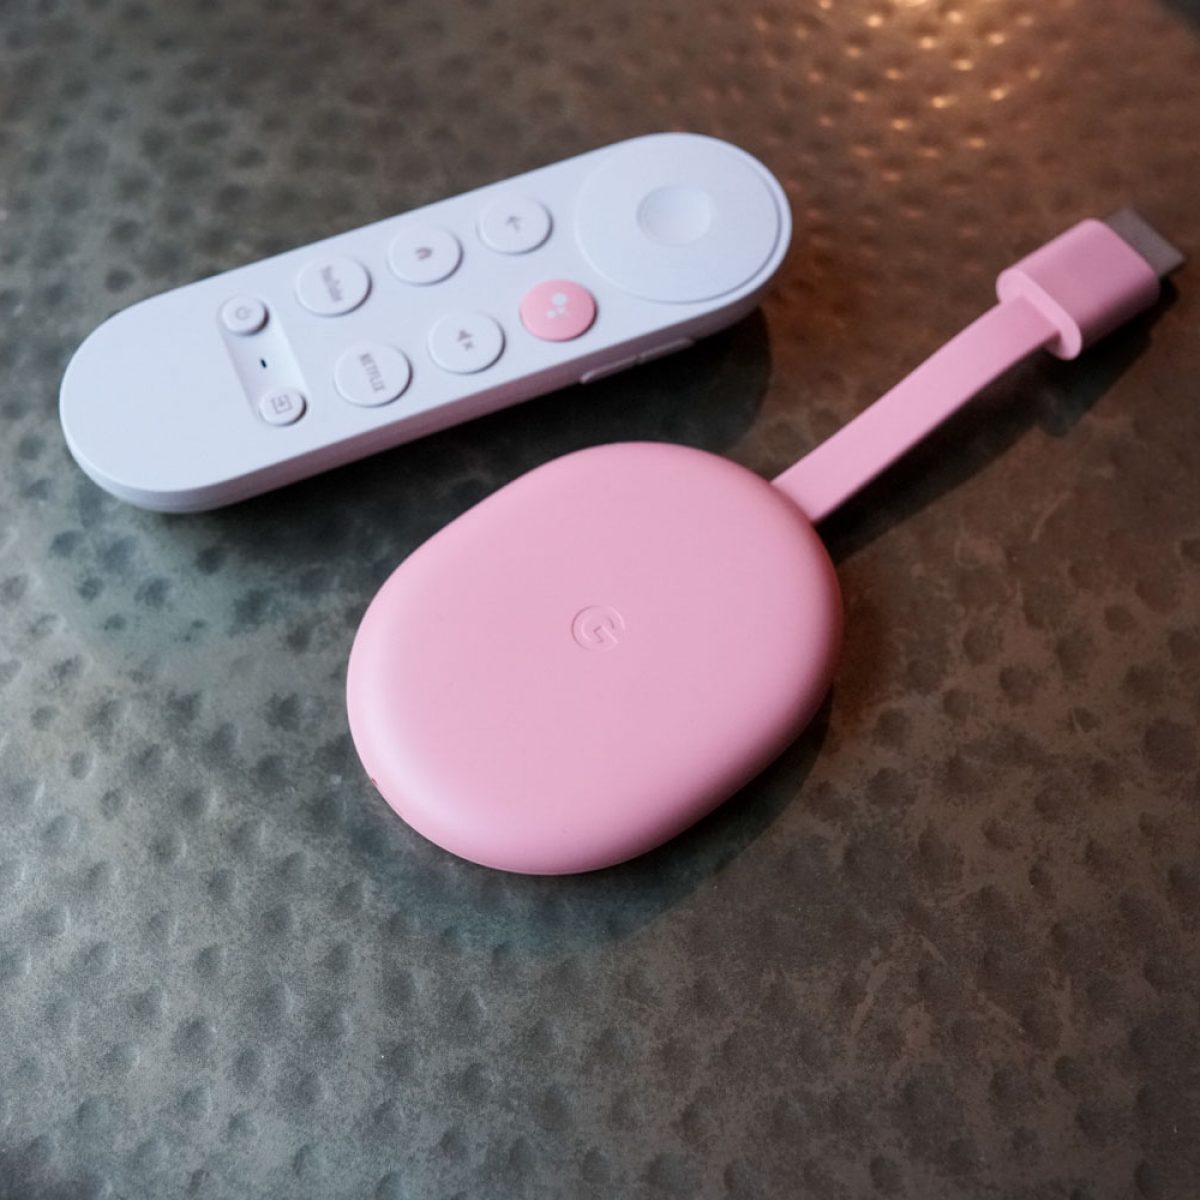 Why my family is ditching Chromecast for Android TV (yes, really)